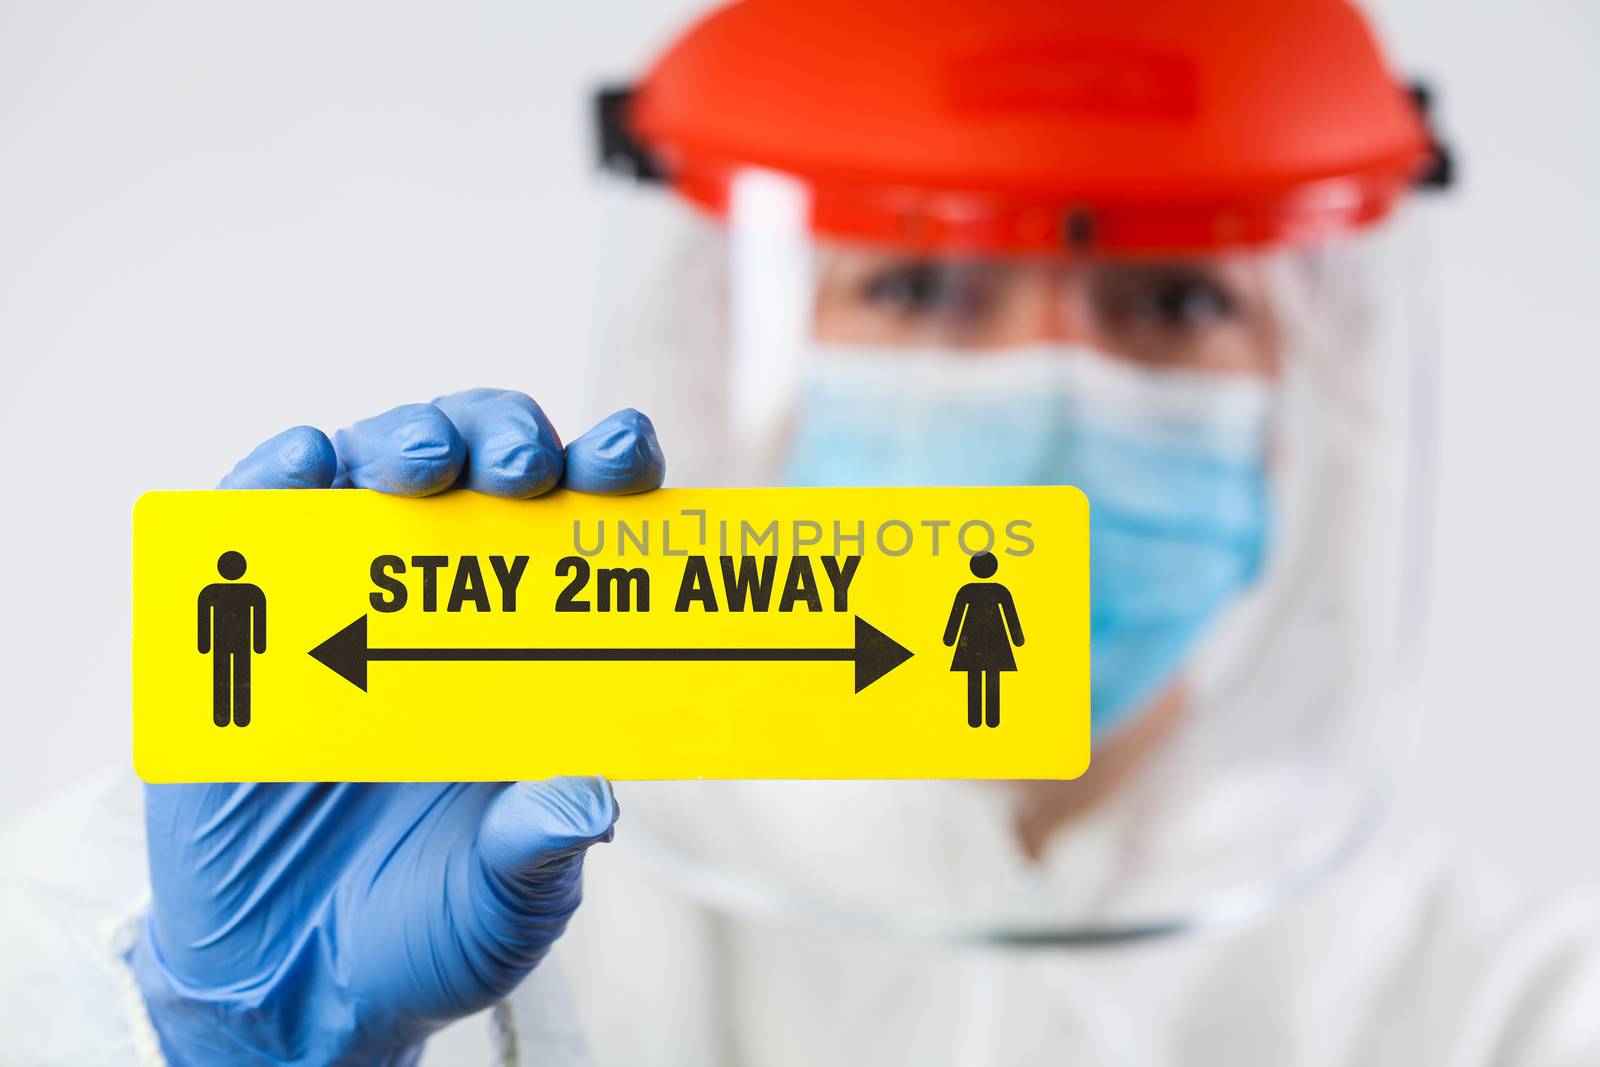 Medical worker in personal protective equipment holding yellow "STAY 2m AWAY" sign,social physical distancing to prevent and stop spread of viruses and infections,Coronavirus COVID-19 global pandemic